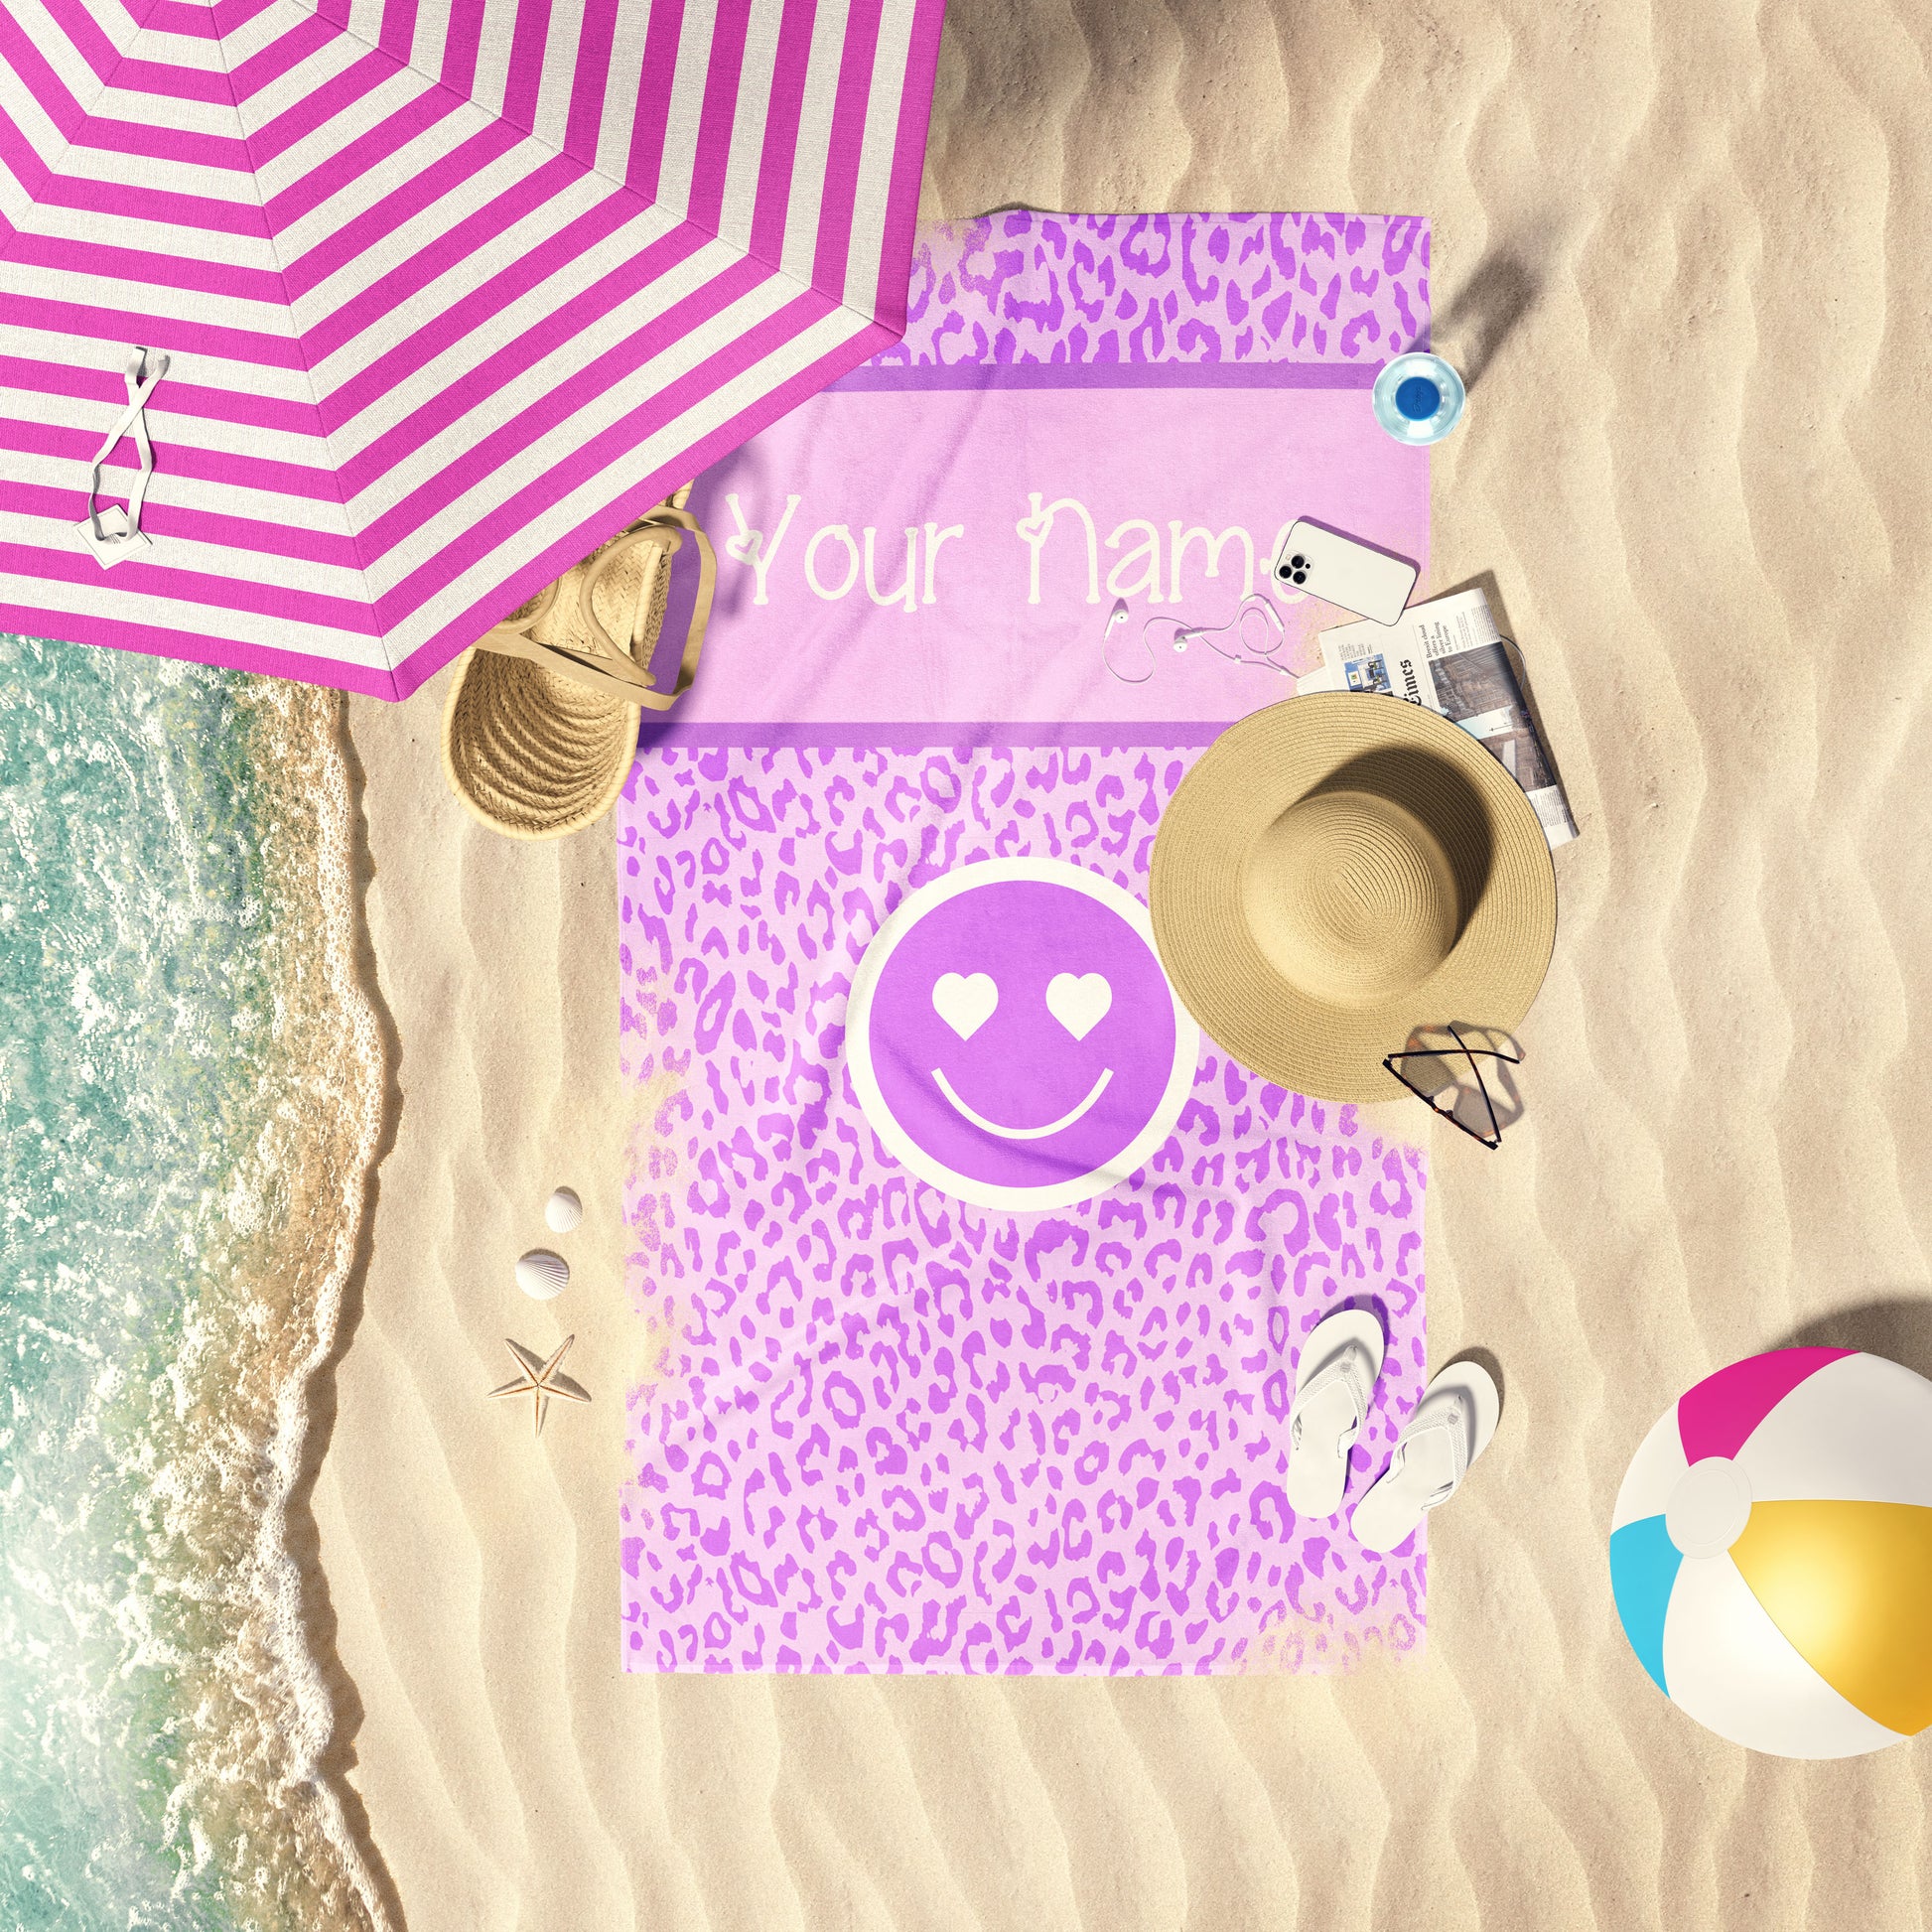 Purple and Lavender leopard print beach towel laid out by the water at the beach.